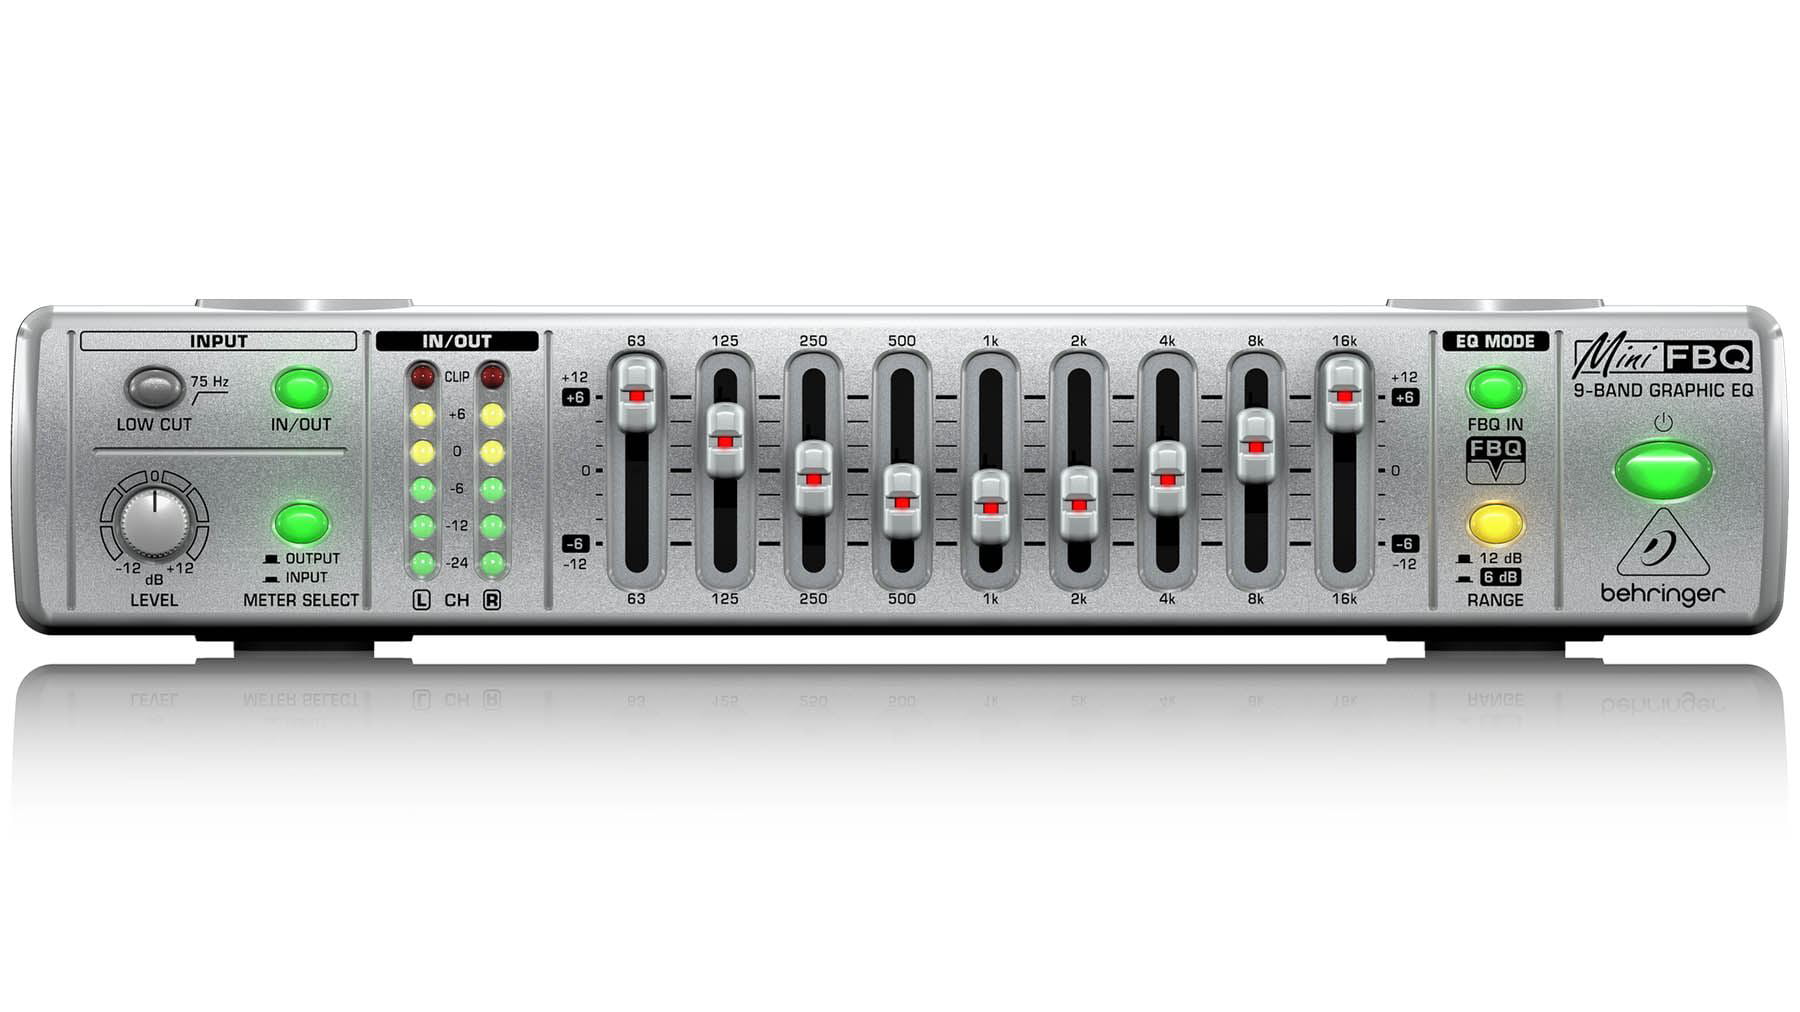 Behringer MINIFBQ FBQ800 Ultra-Compact 9-Band Graphic Equalizer with FBQ